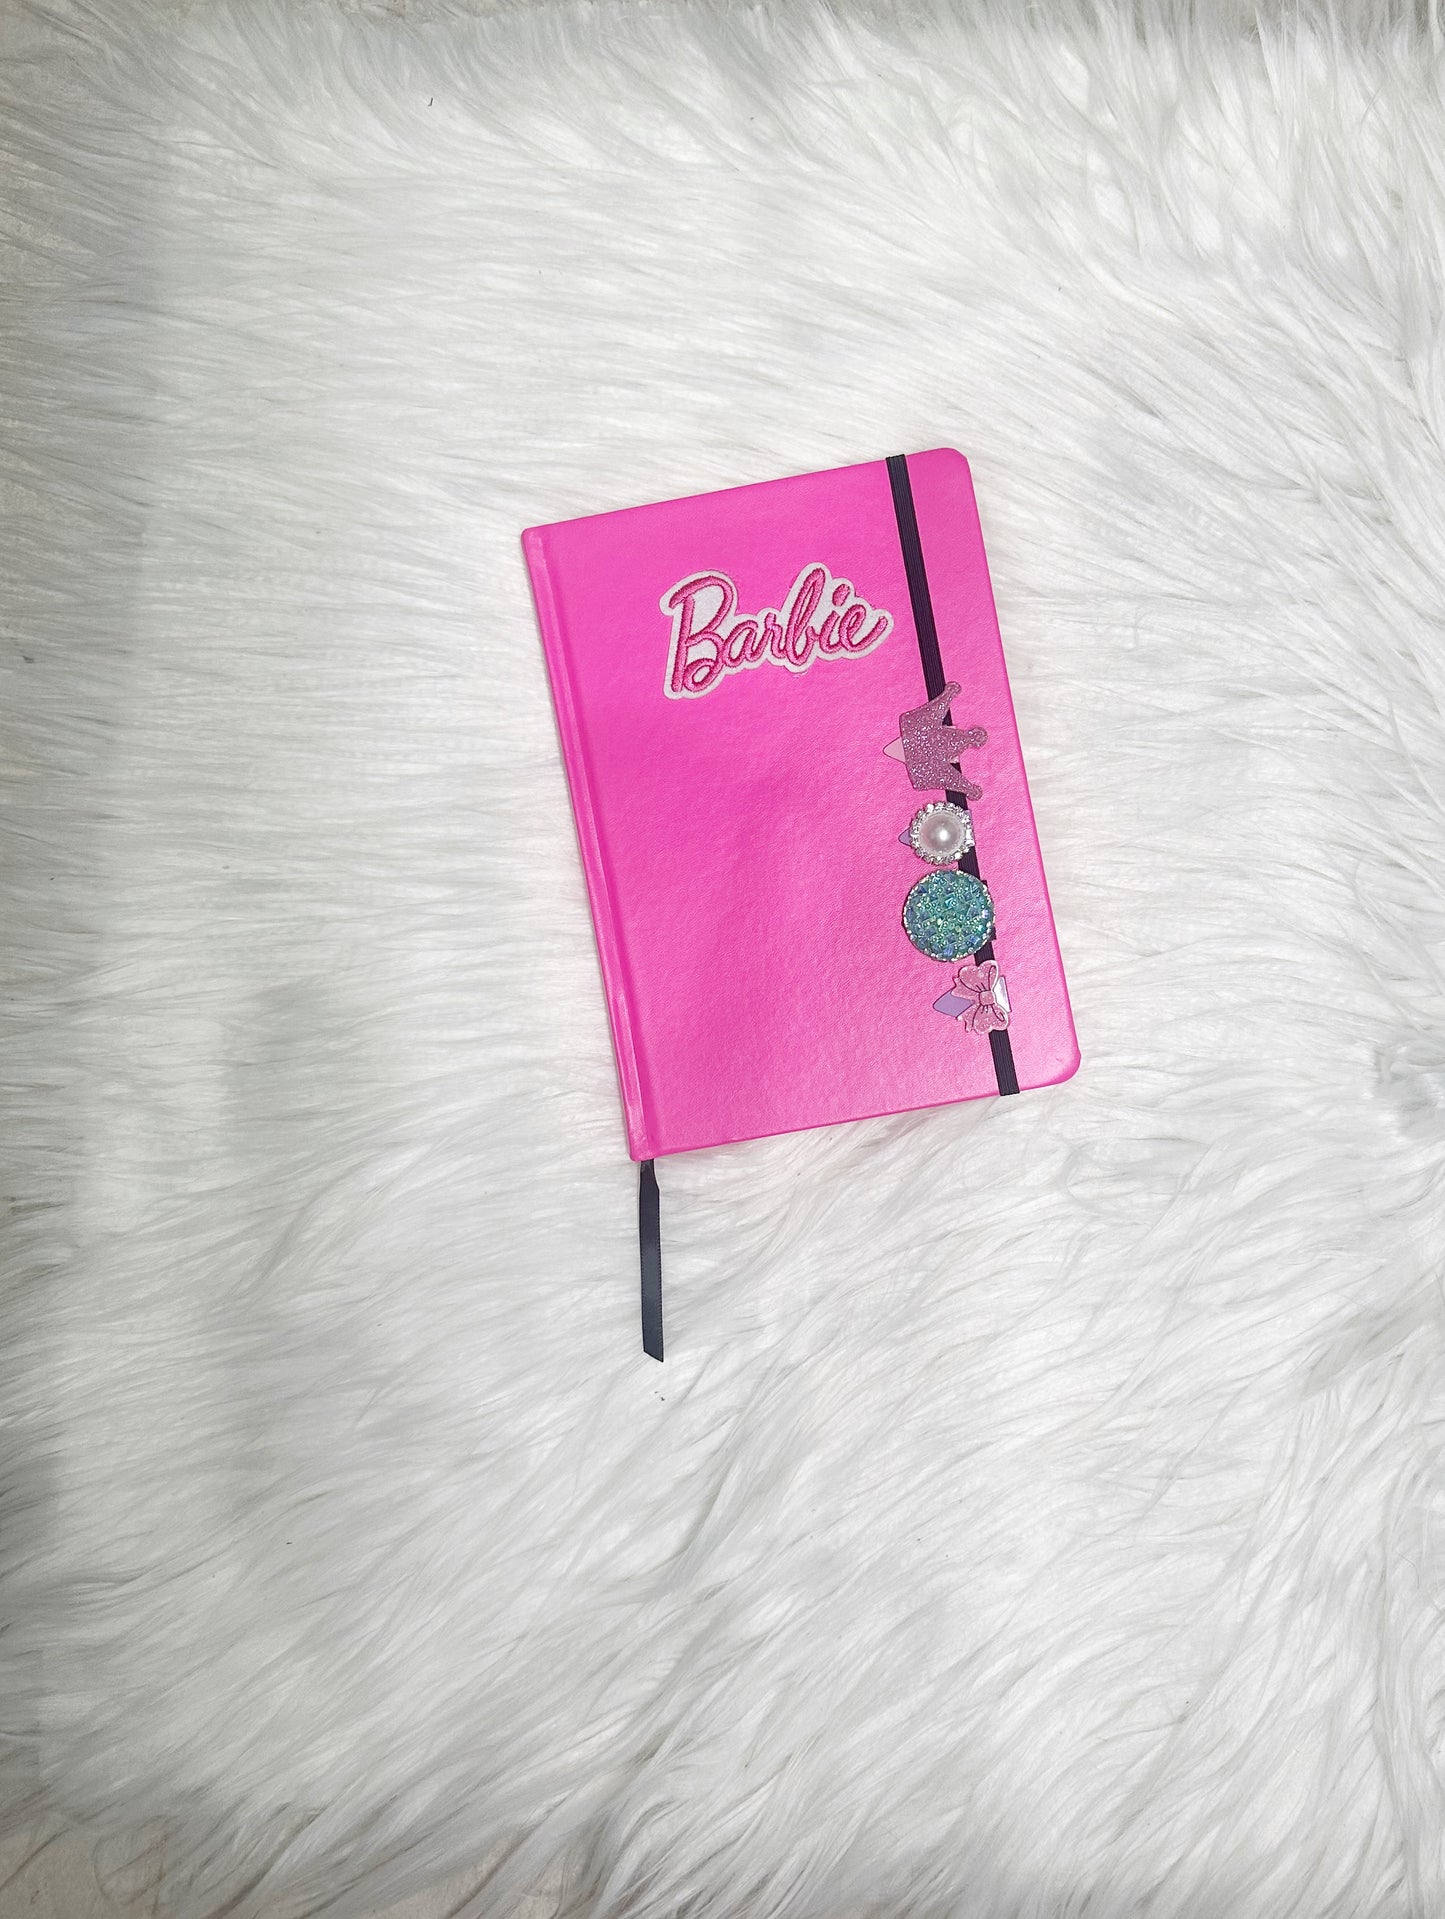 Barbie Journal Neon Pink Personalized